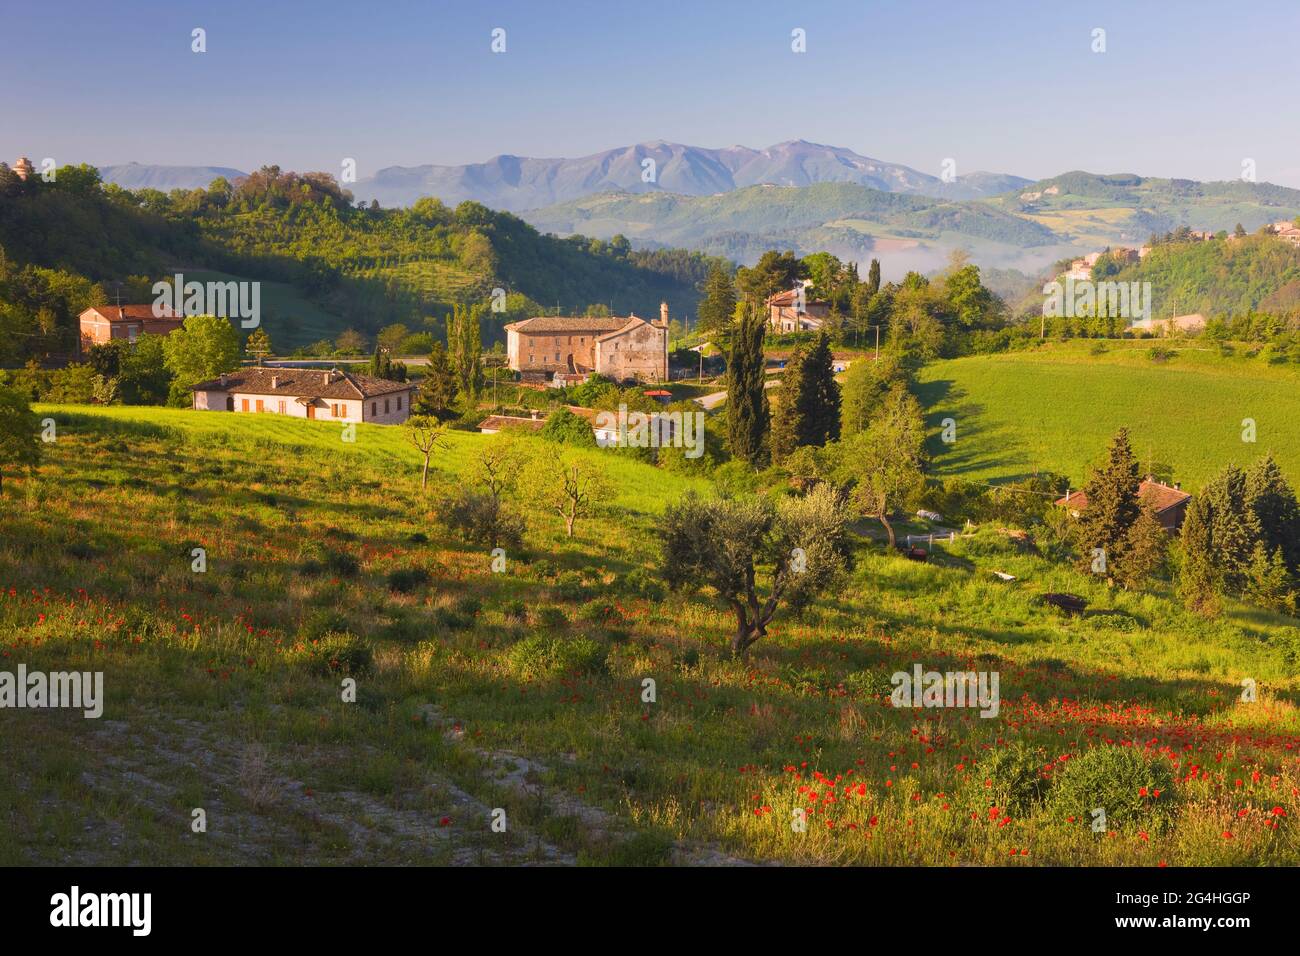 Buildings and countryside near Urbino, Marche, Italy Stock Photo